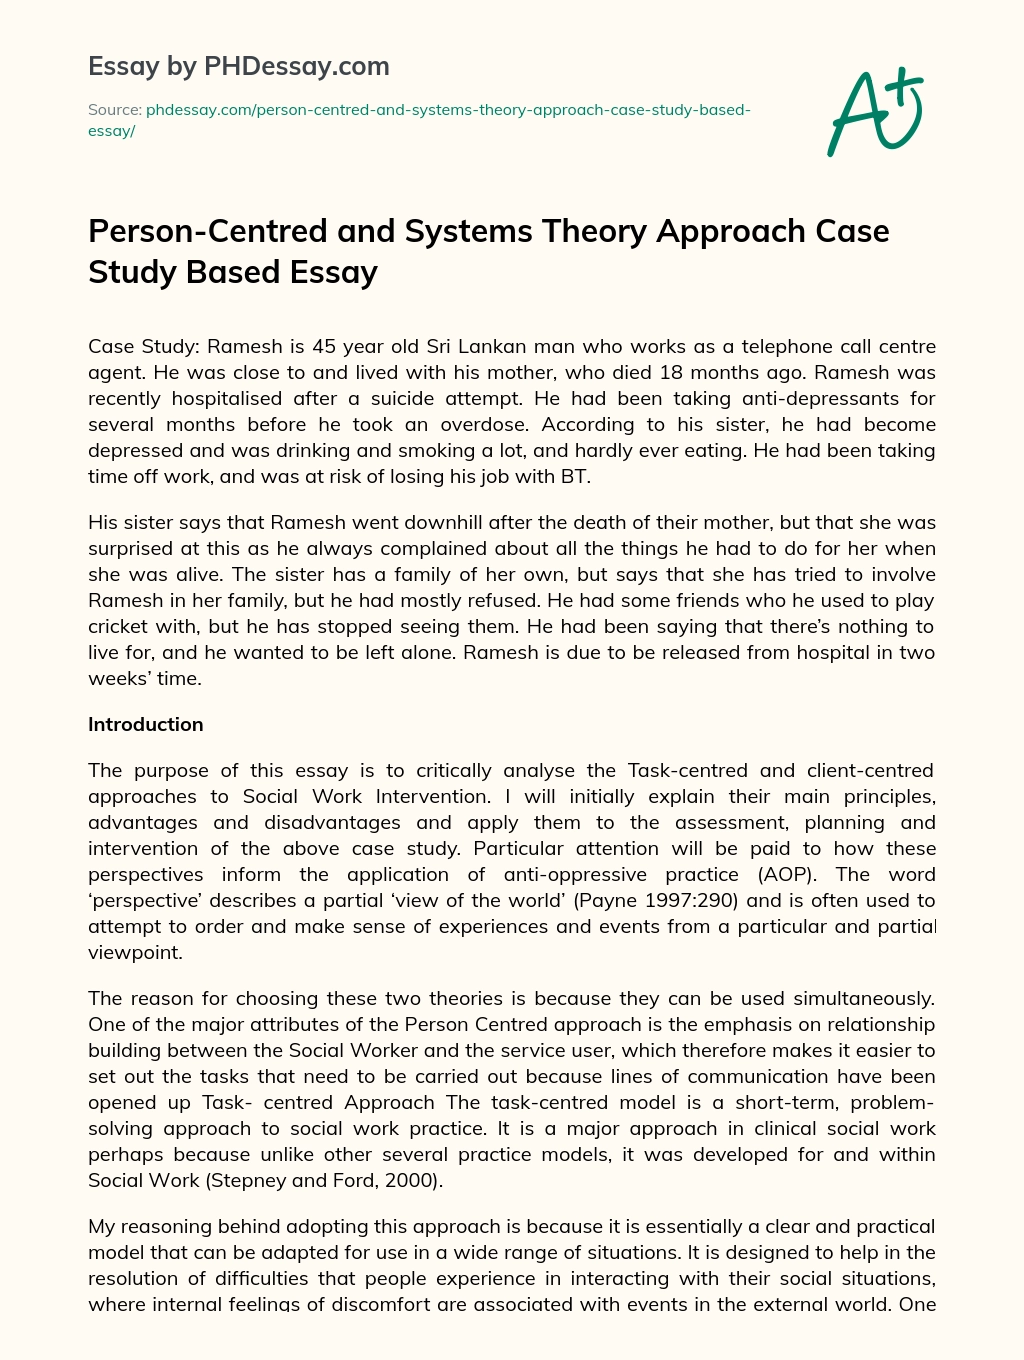 Person-Centred and Systems Theory Approach Case Study Based Essay essay